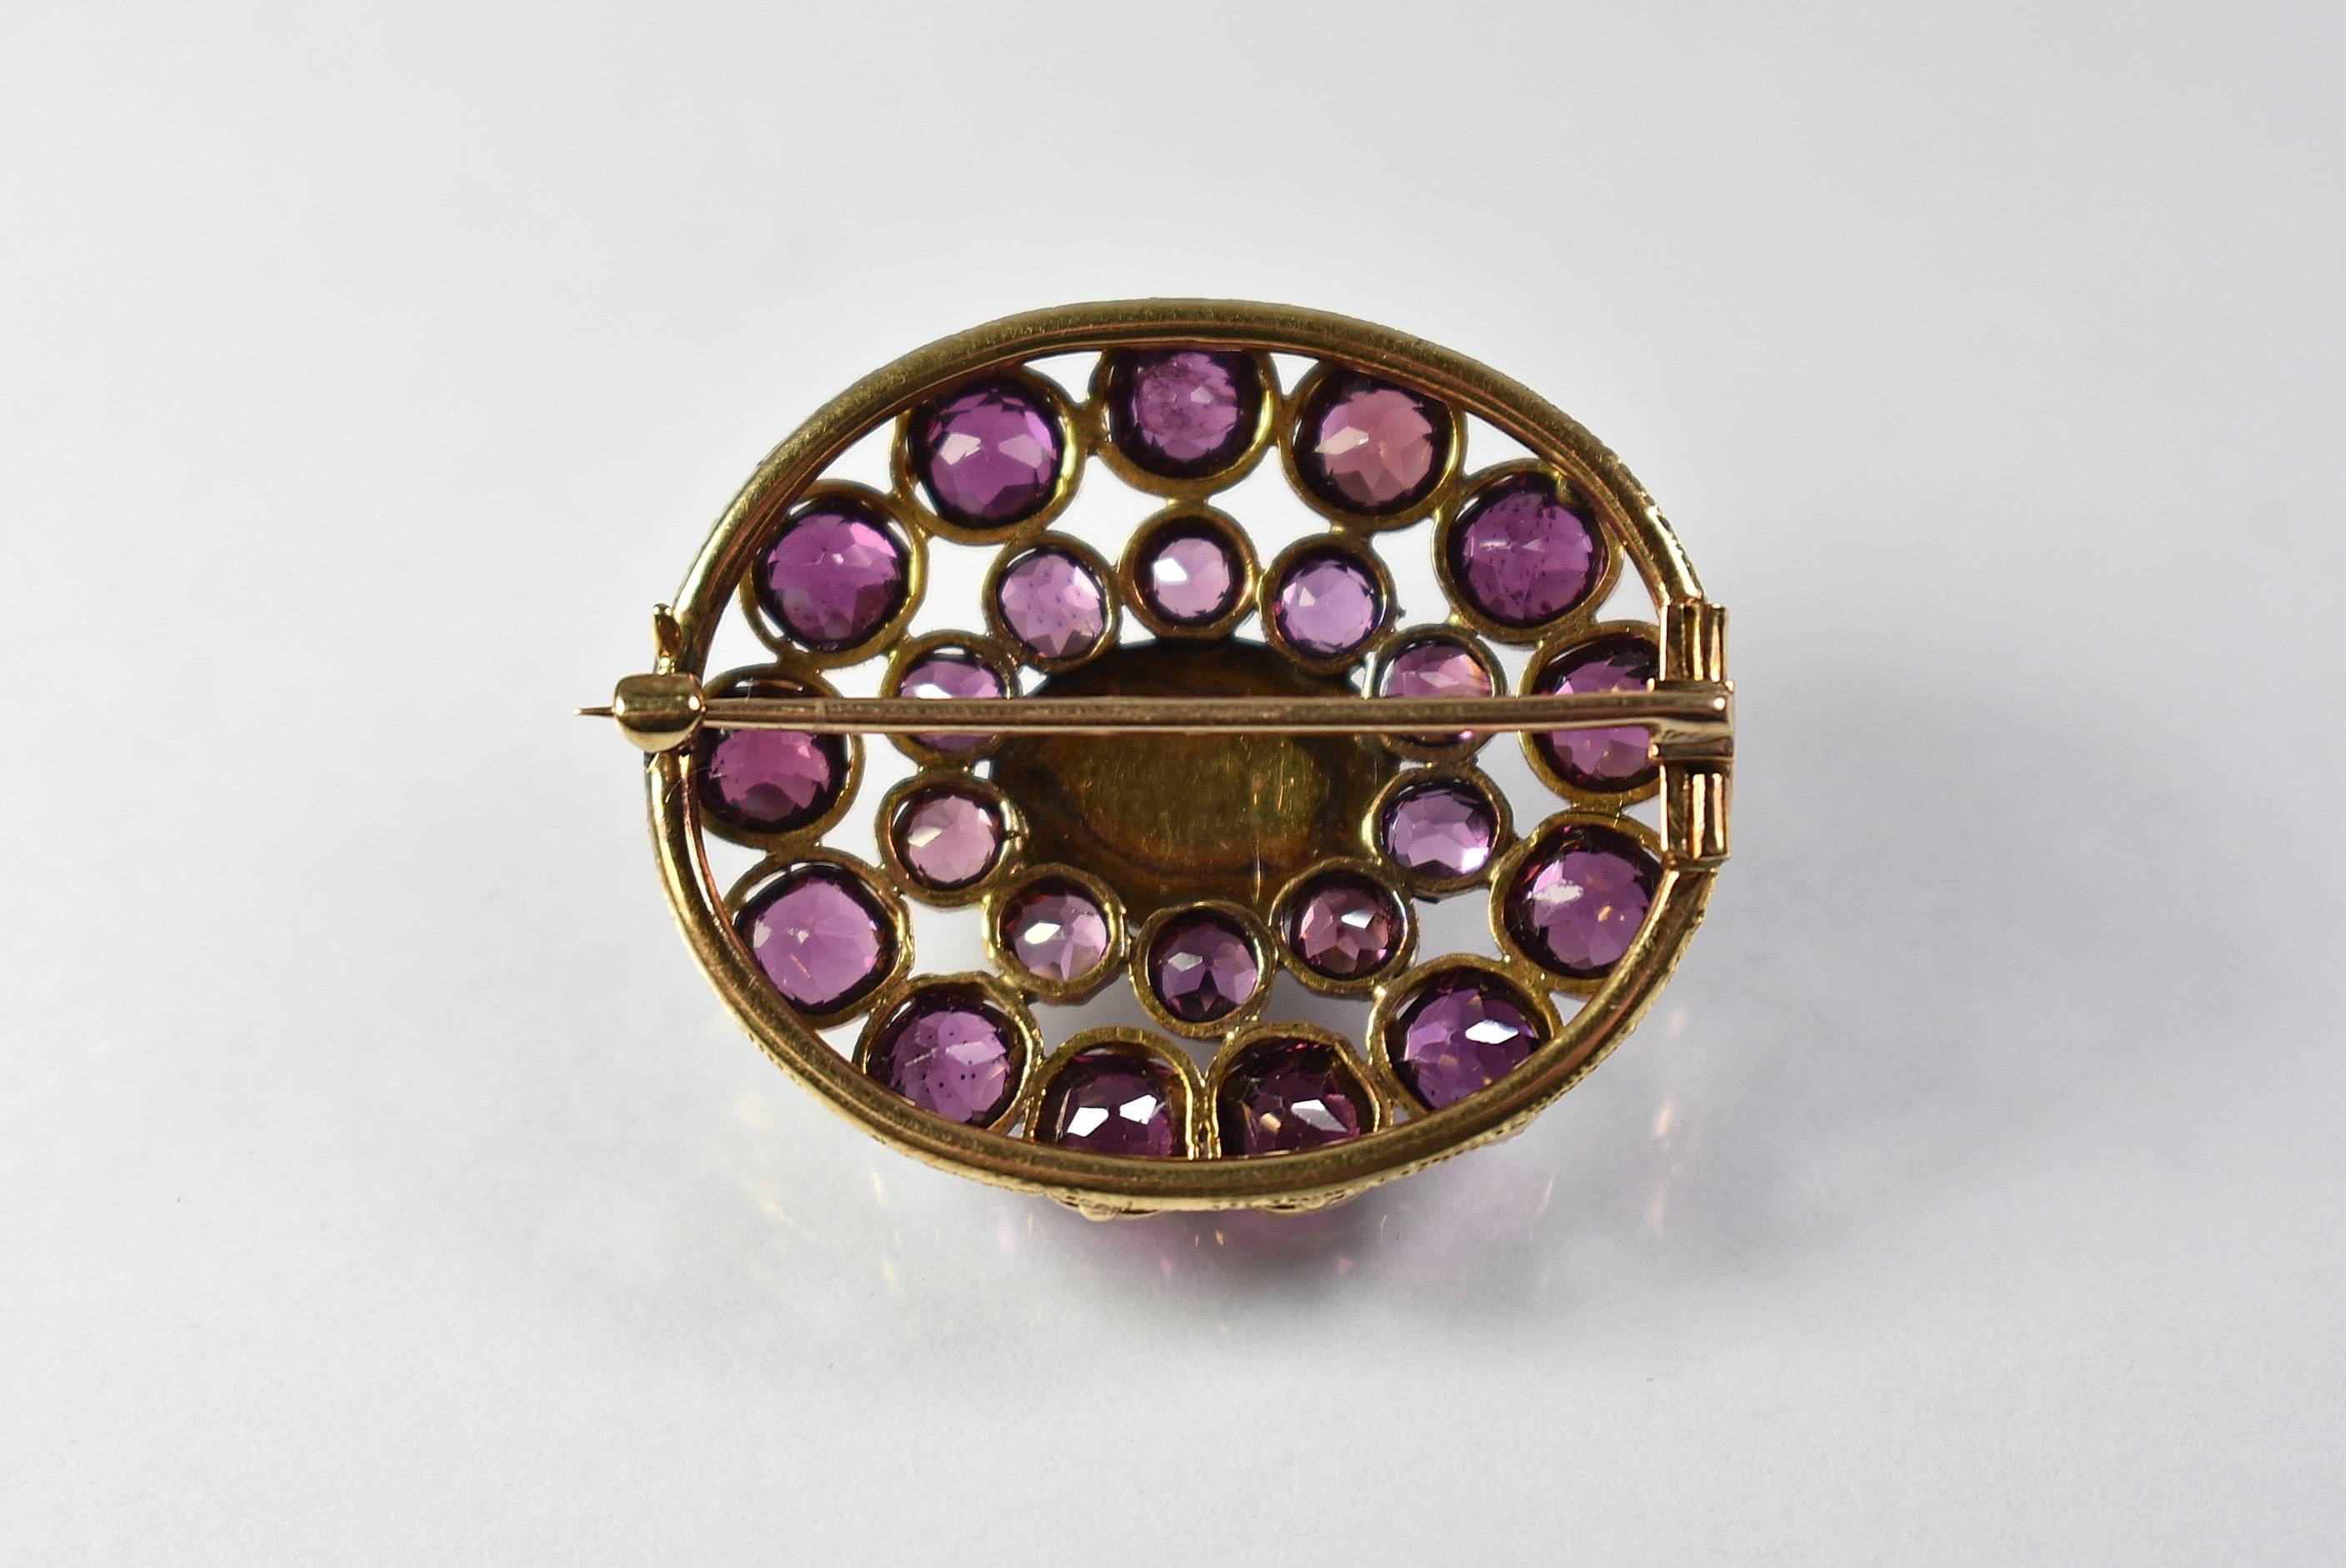 A stunning Almandine Garnet Victorian era brooch. This stunning piece features a centre cabochon surrounded by 22 facetted round stones. It has been test as 14-karat. It is 1 3/8